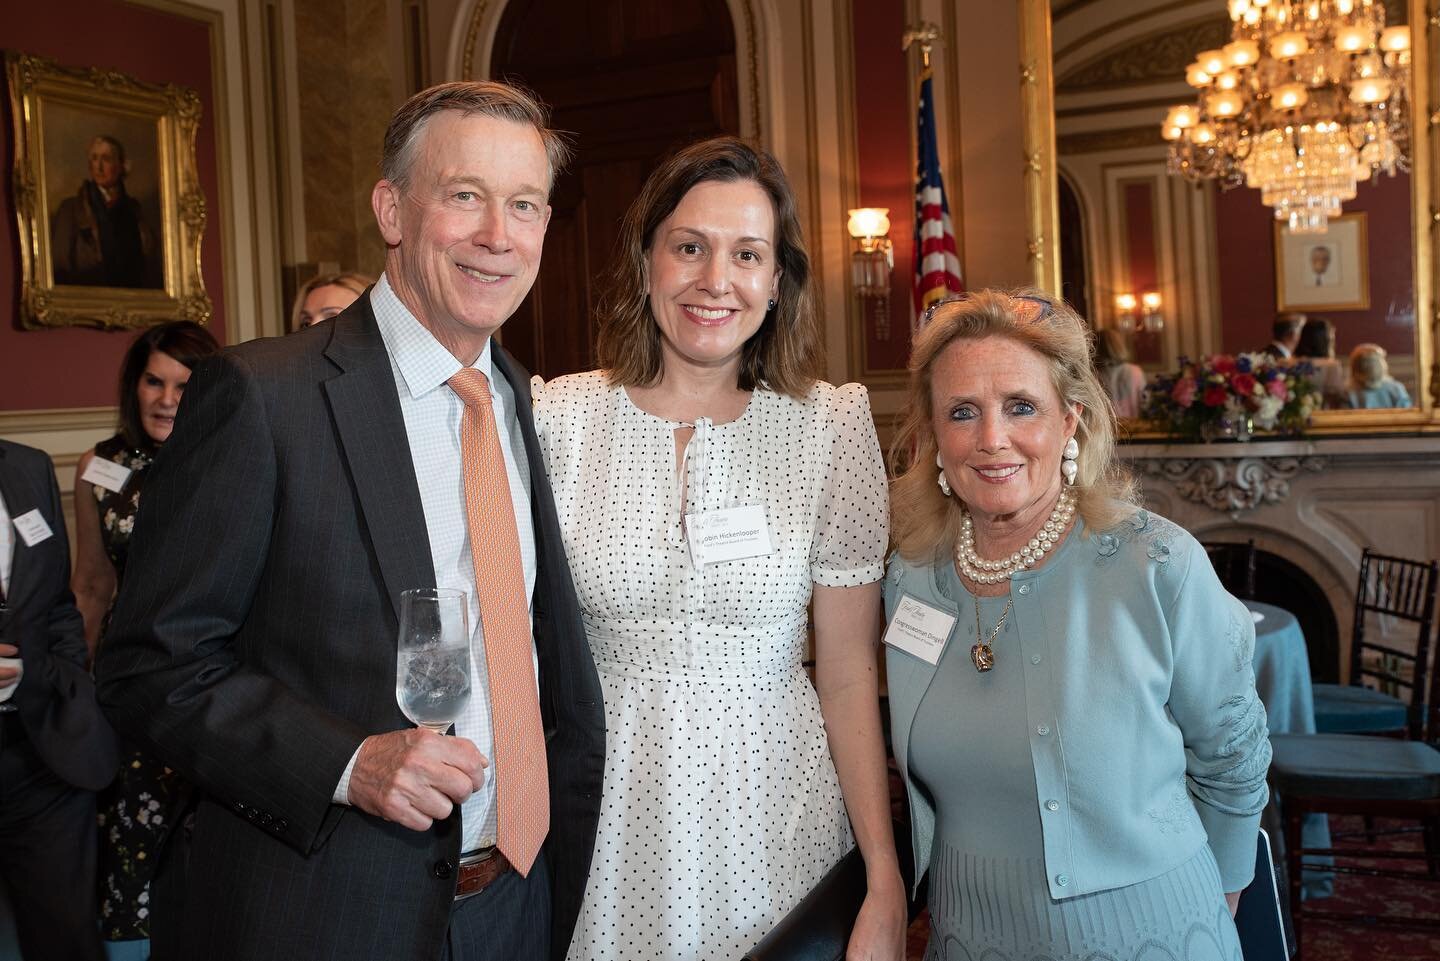 With events back in full swing, I thought I&rsquo;d share some images from the @fordstheatre Annual Gala that Liz and I photographed over 2 days in June of last year. It was kind of mind blowing to be inside the Capitol building and also watching the